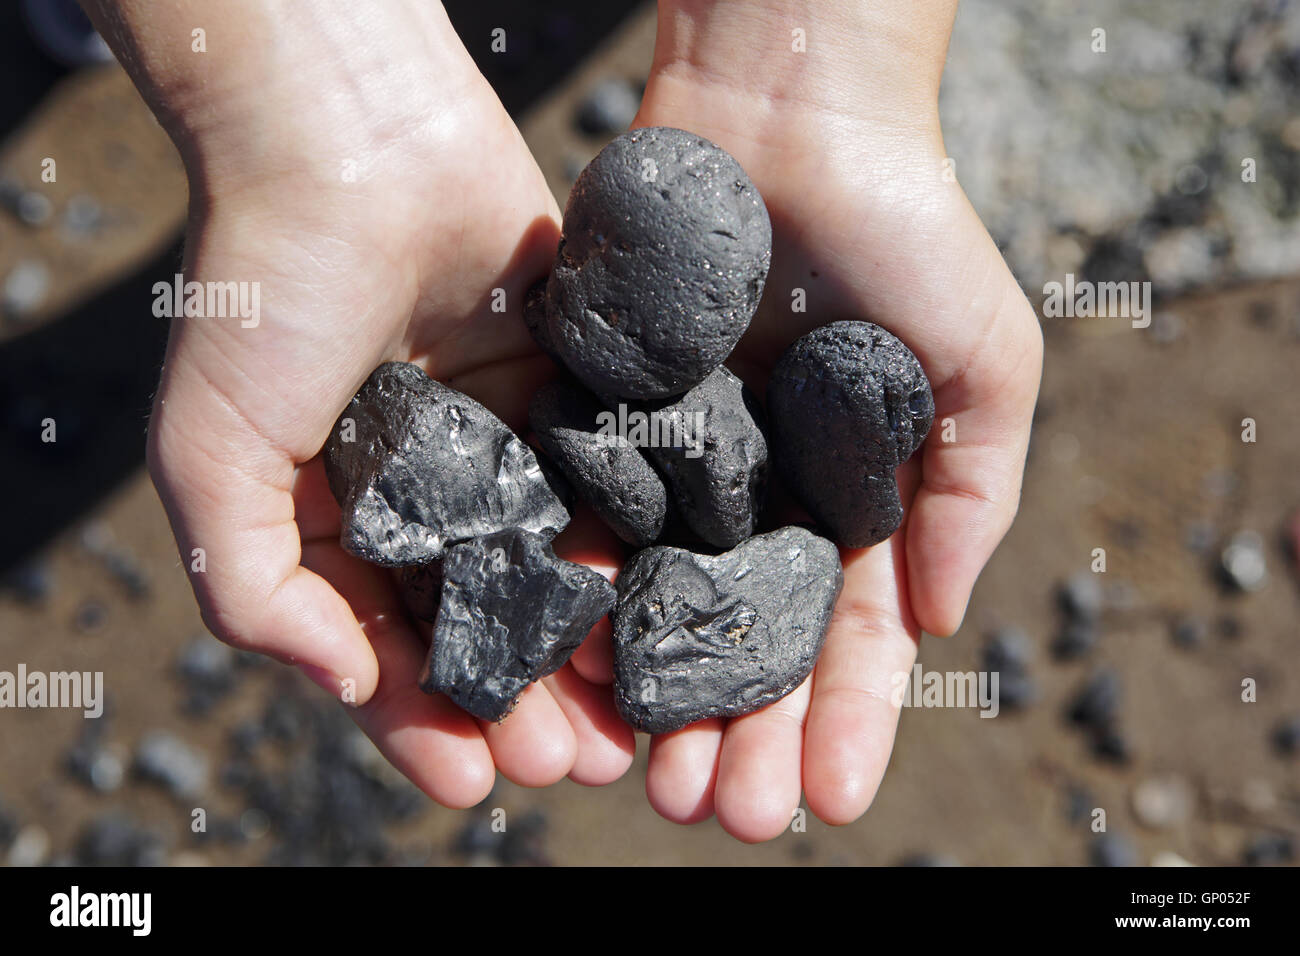 Two hands holding pieces of the fossil fuel anthracite coal found on the East River shoreline in New York. Coal lost from ships in past times. Stock Photo